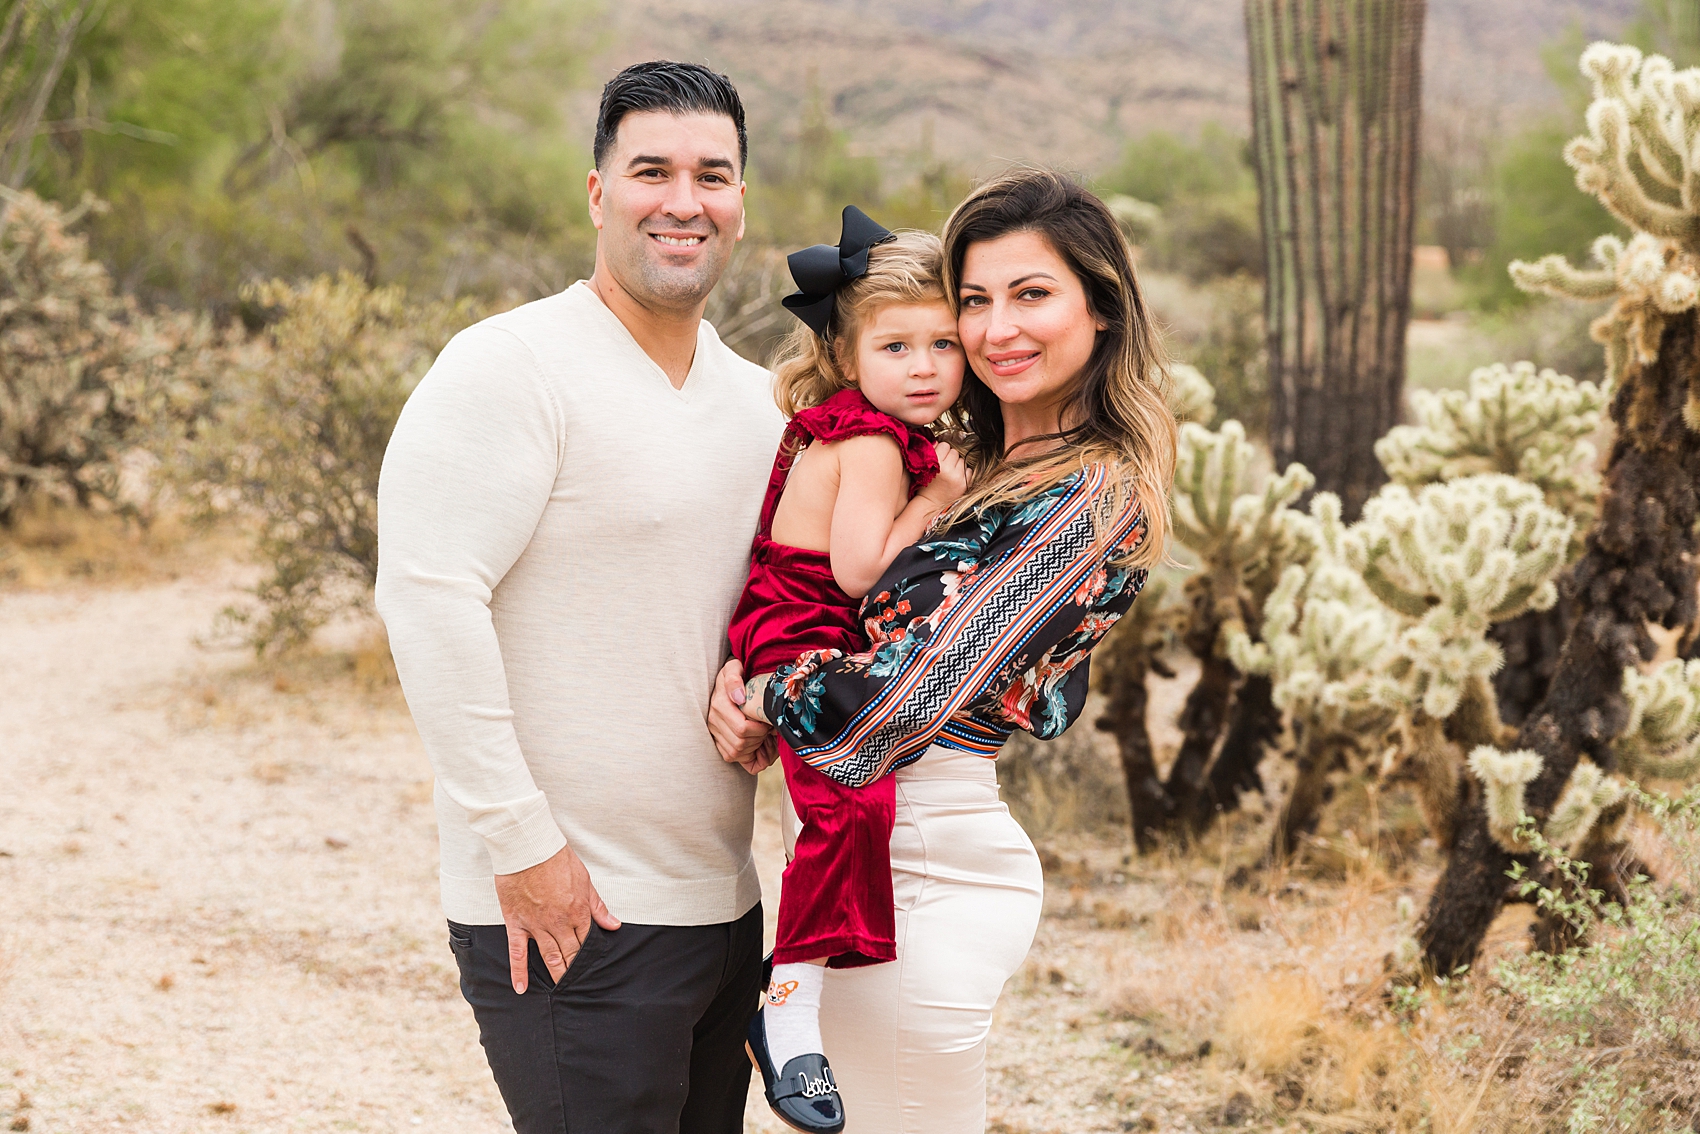 Leah Hope Photography | Scottsdale Phoenix Arizona | Desert Landscape Cactus Mountains Scenery | Extended Family Photos | Family Pictures | Family Poses | What to Wear